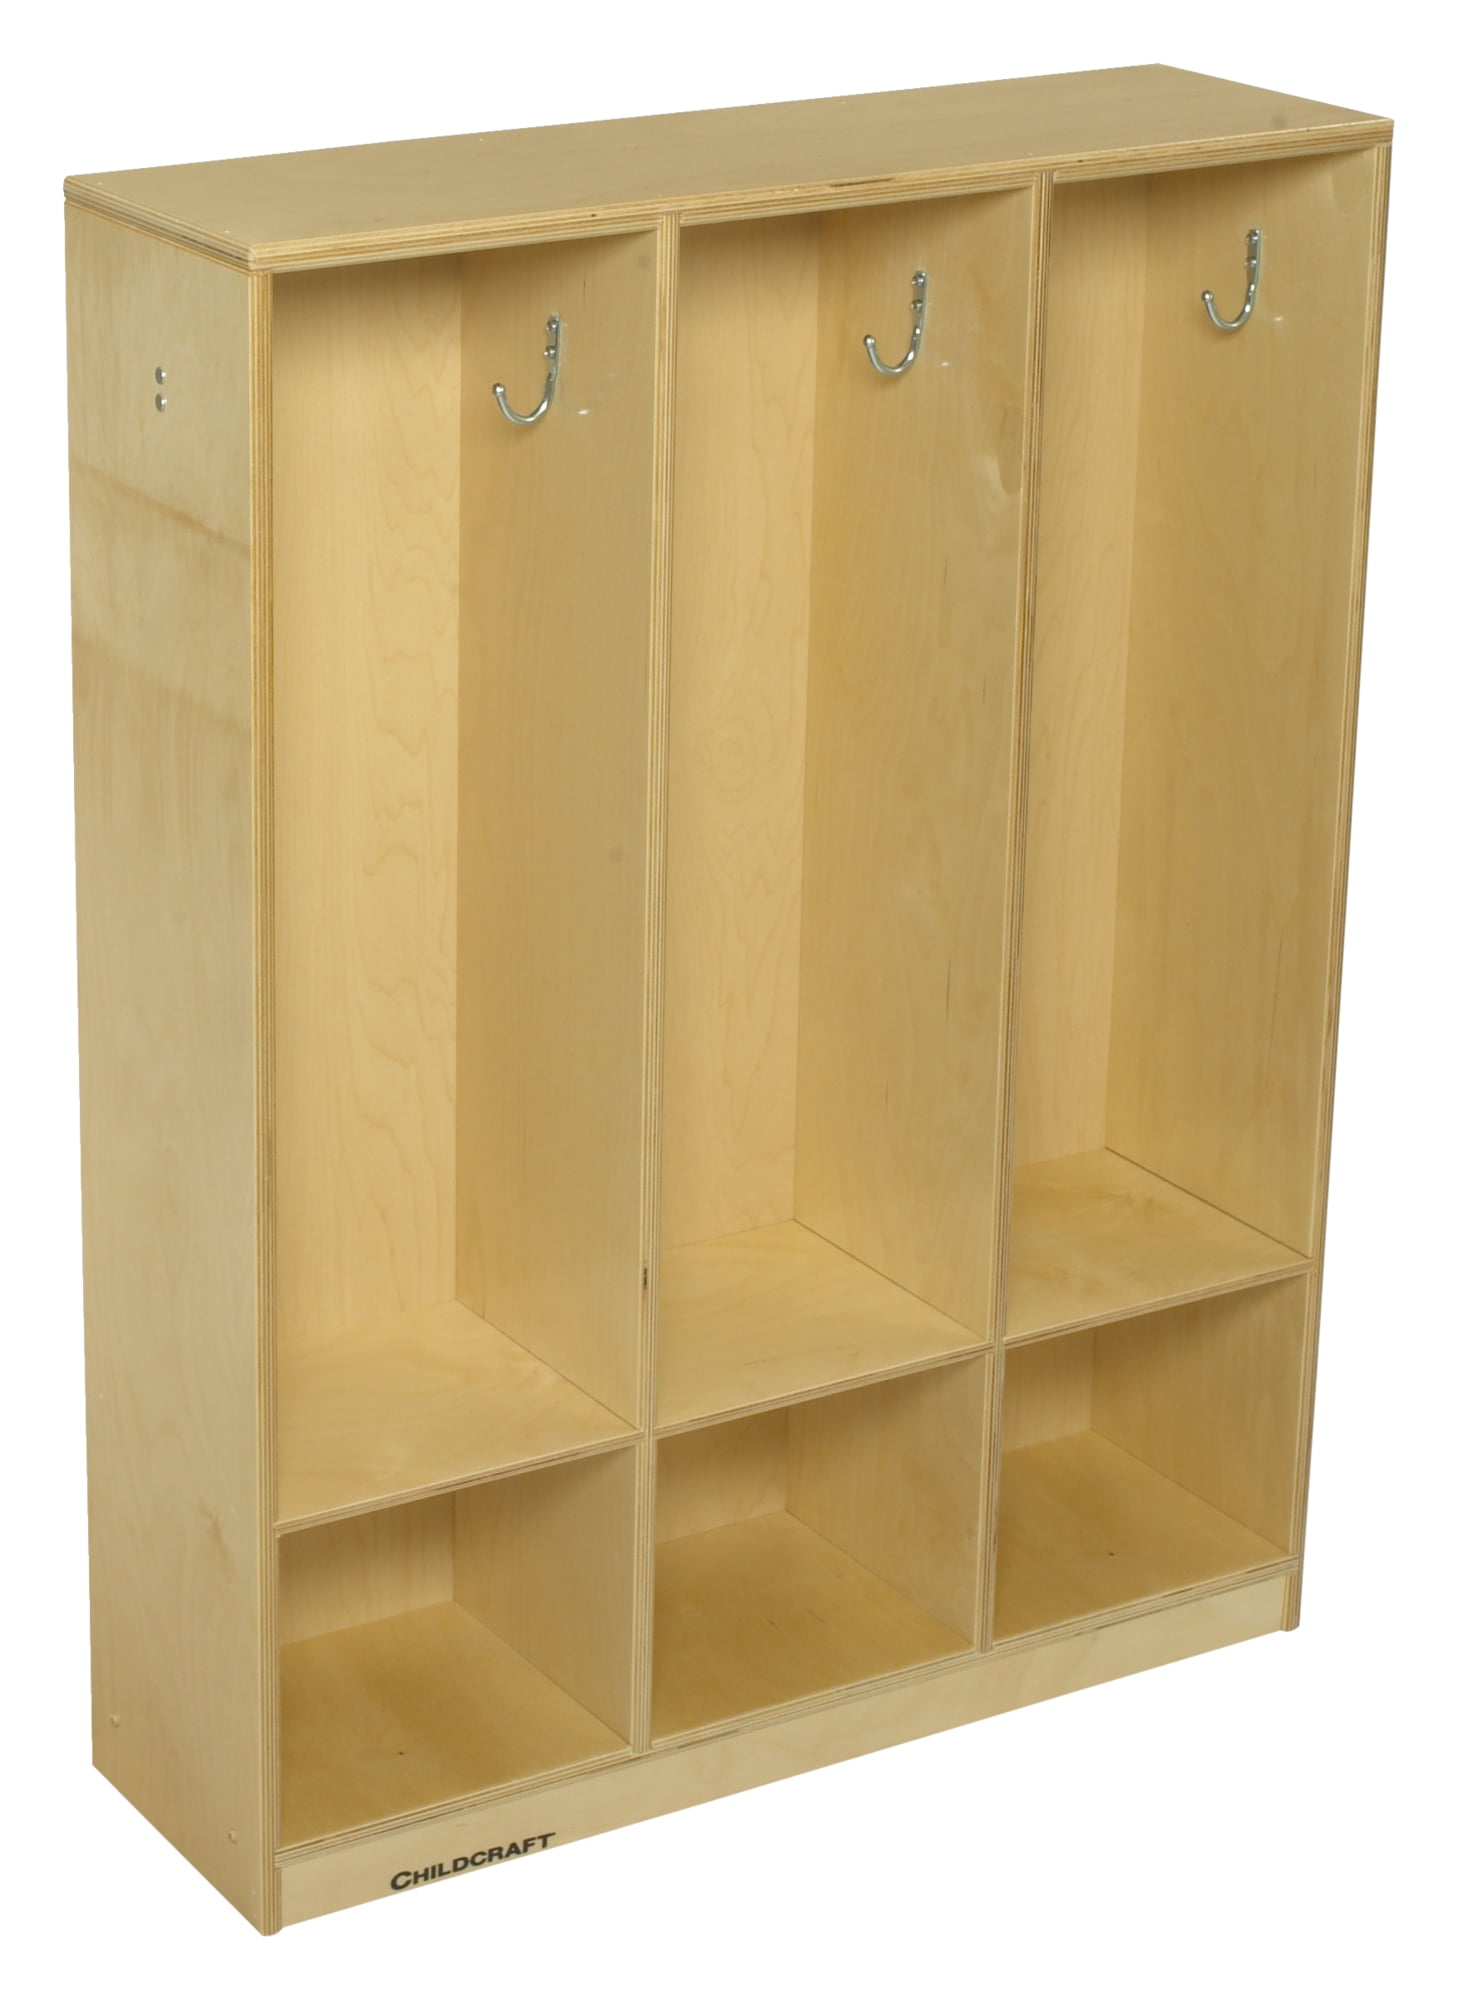 21-7/8 x 9-5/8 x 42 Inches Childcraft Coat Locker 2 Sections 